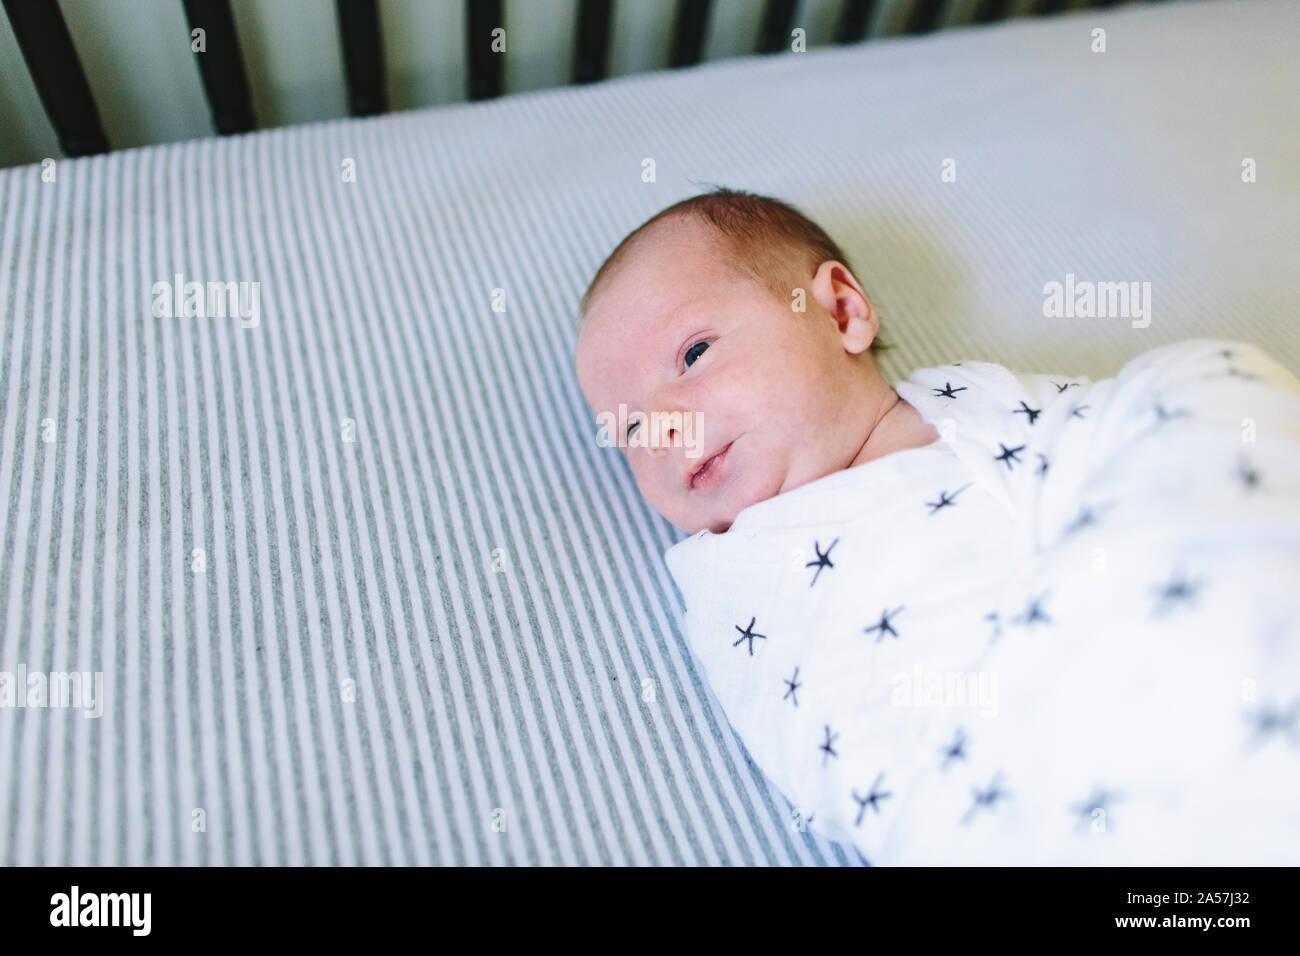 A newborn baby laying in his crib while swaddled Stock Photo